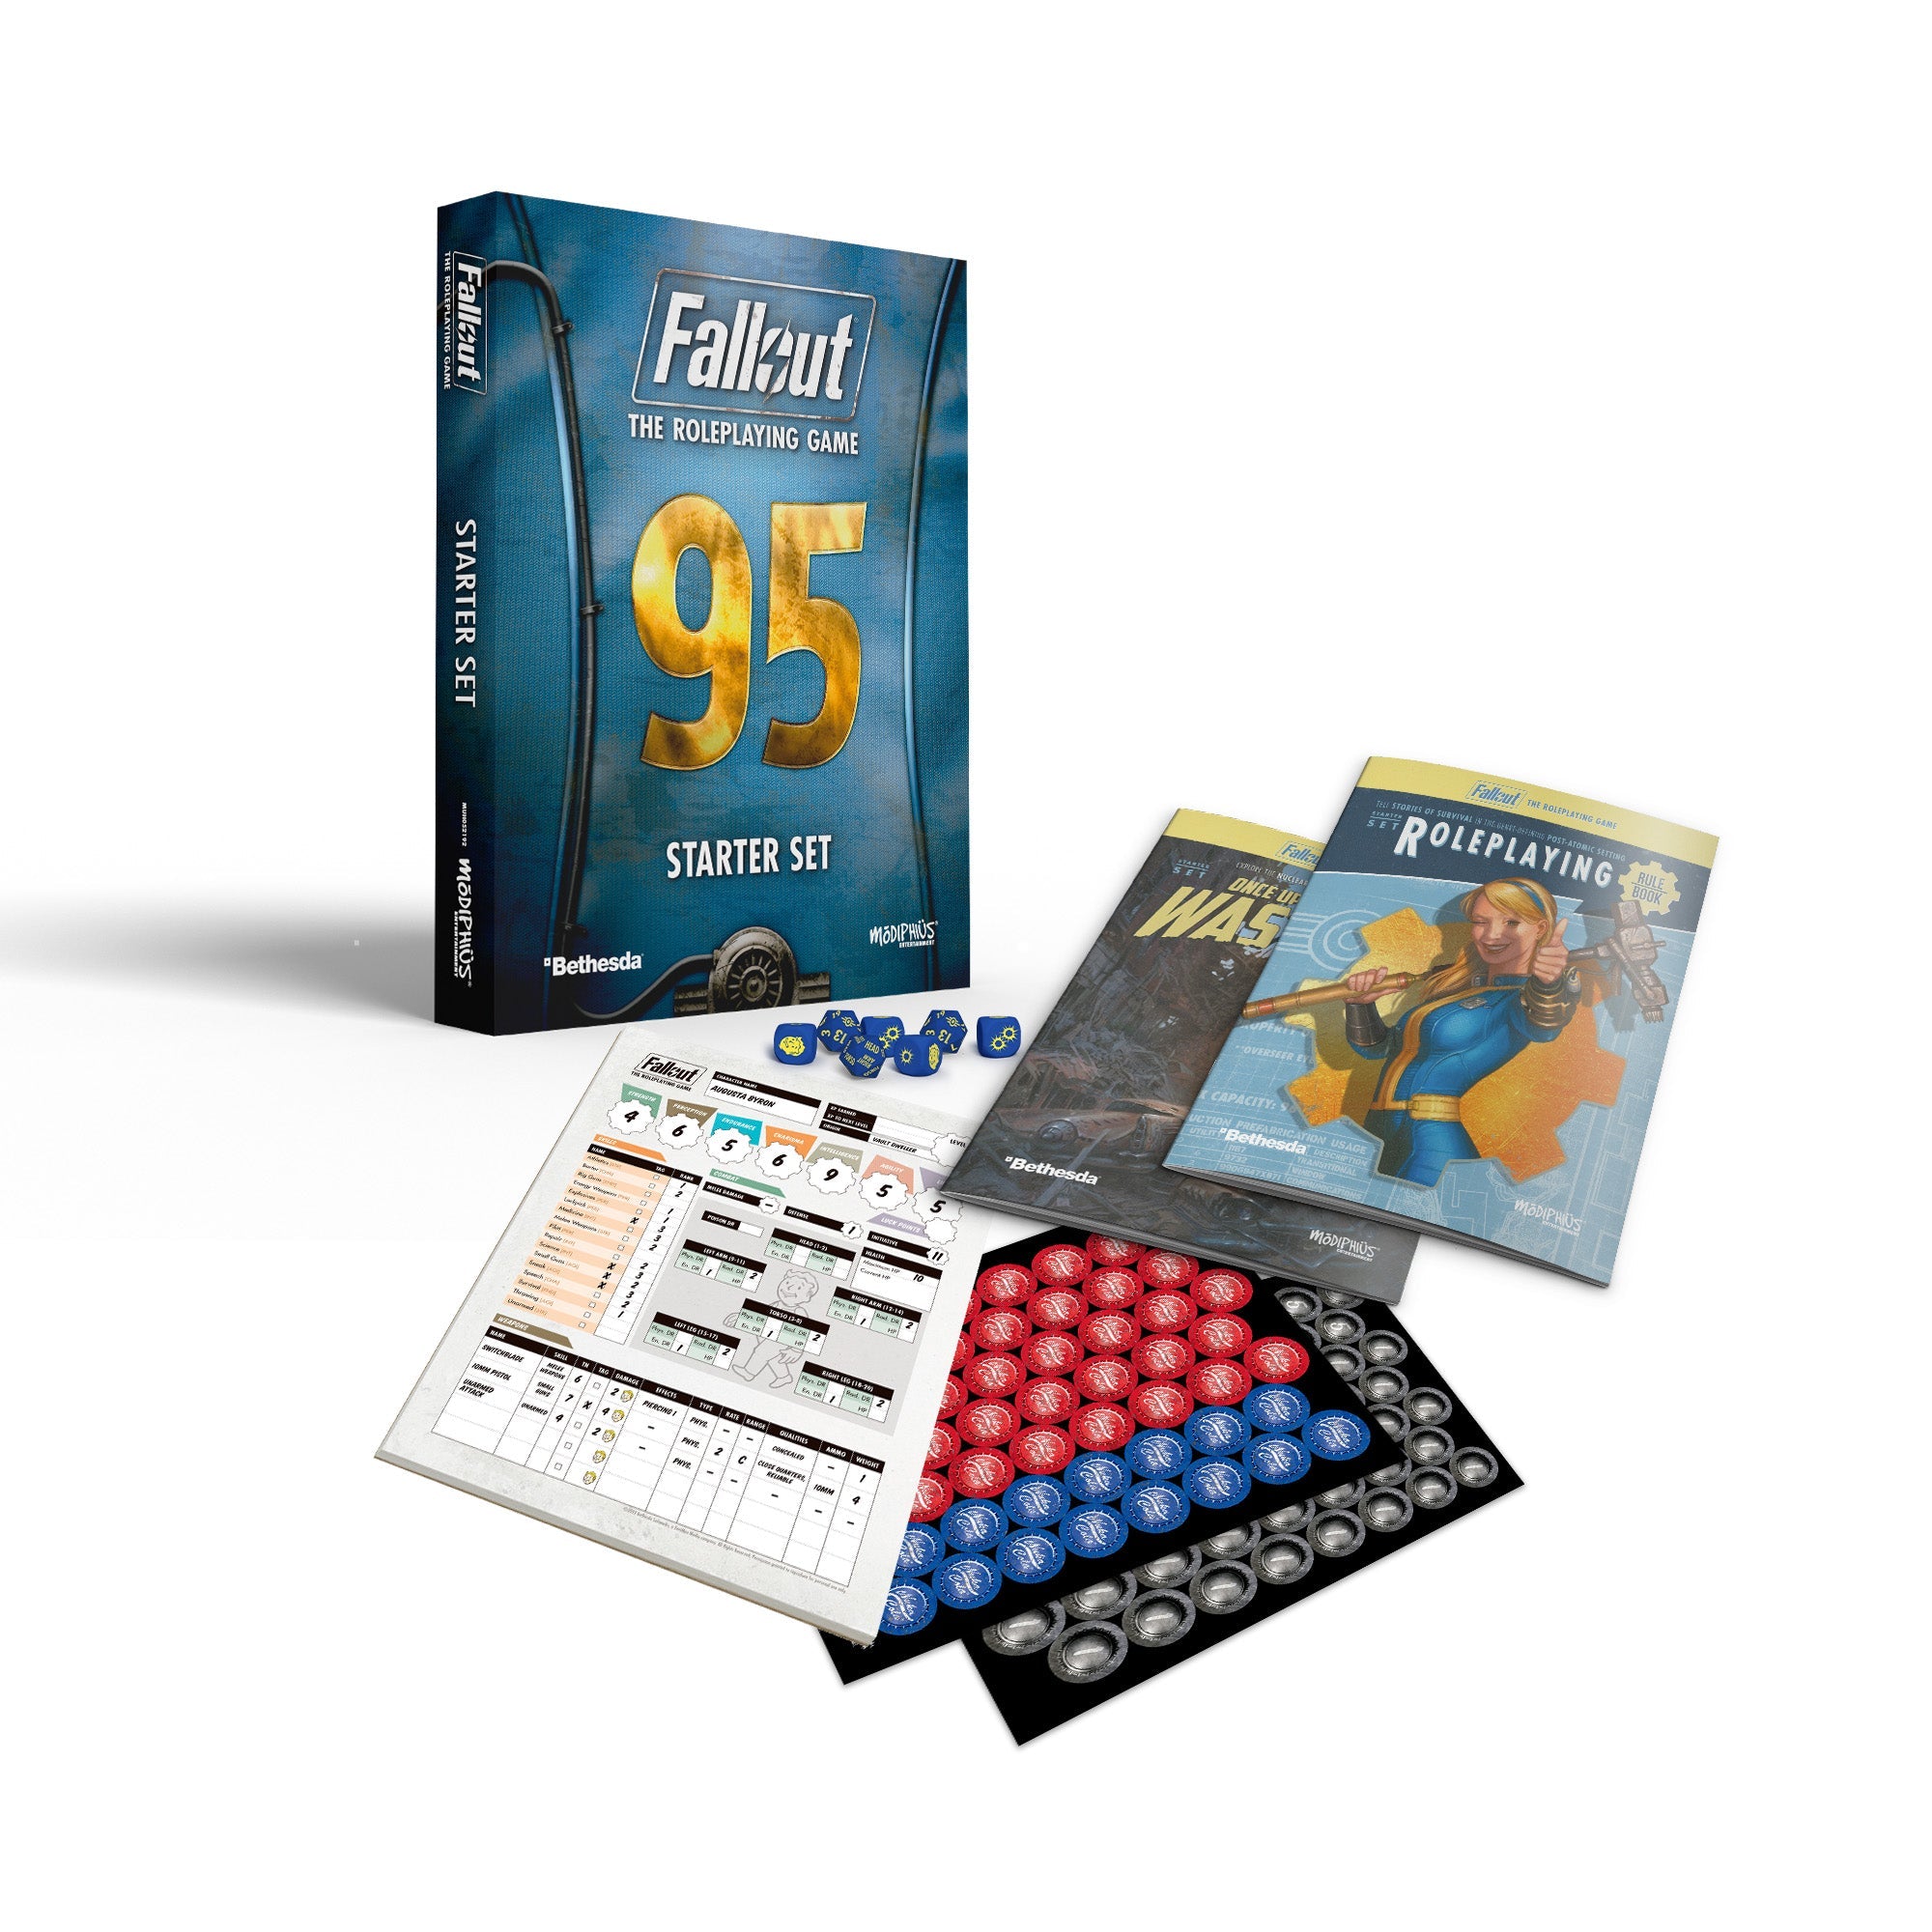 Игра starter. Fallout RPG: стартовый набор. Fallout: the roleplaying game карты. Fallout: the roleplaying game Core Rulebook.